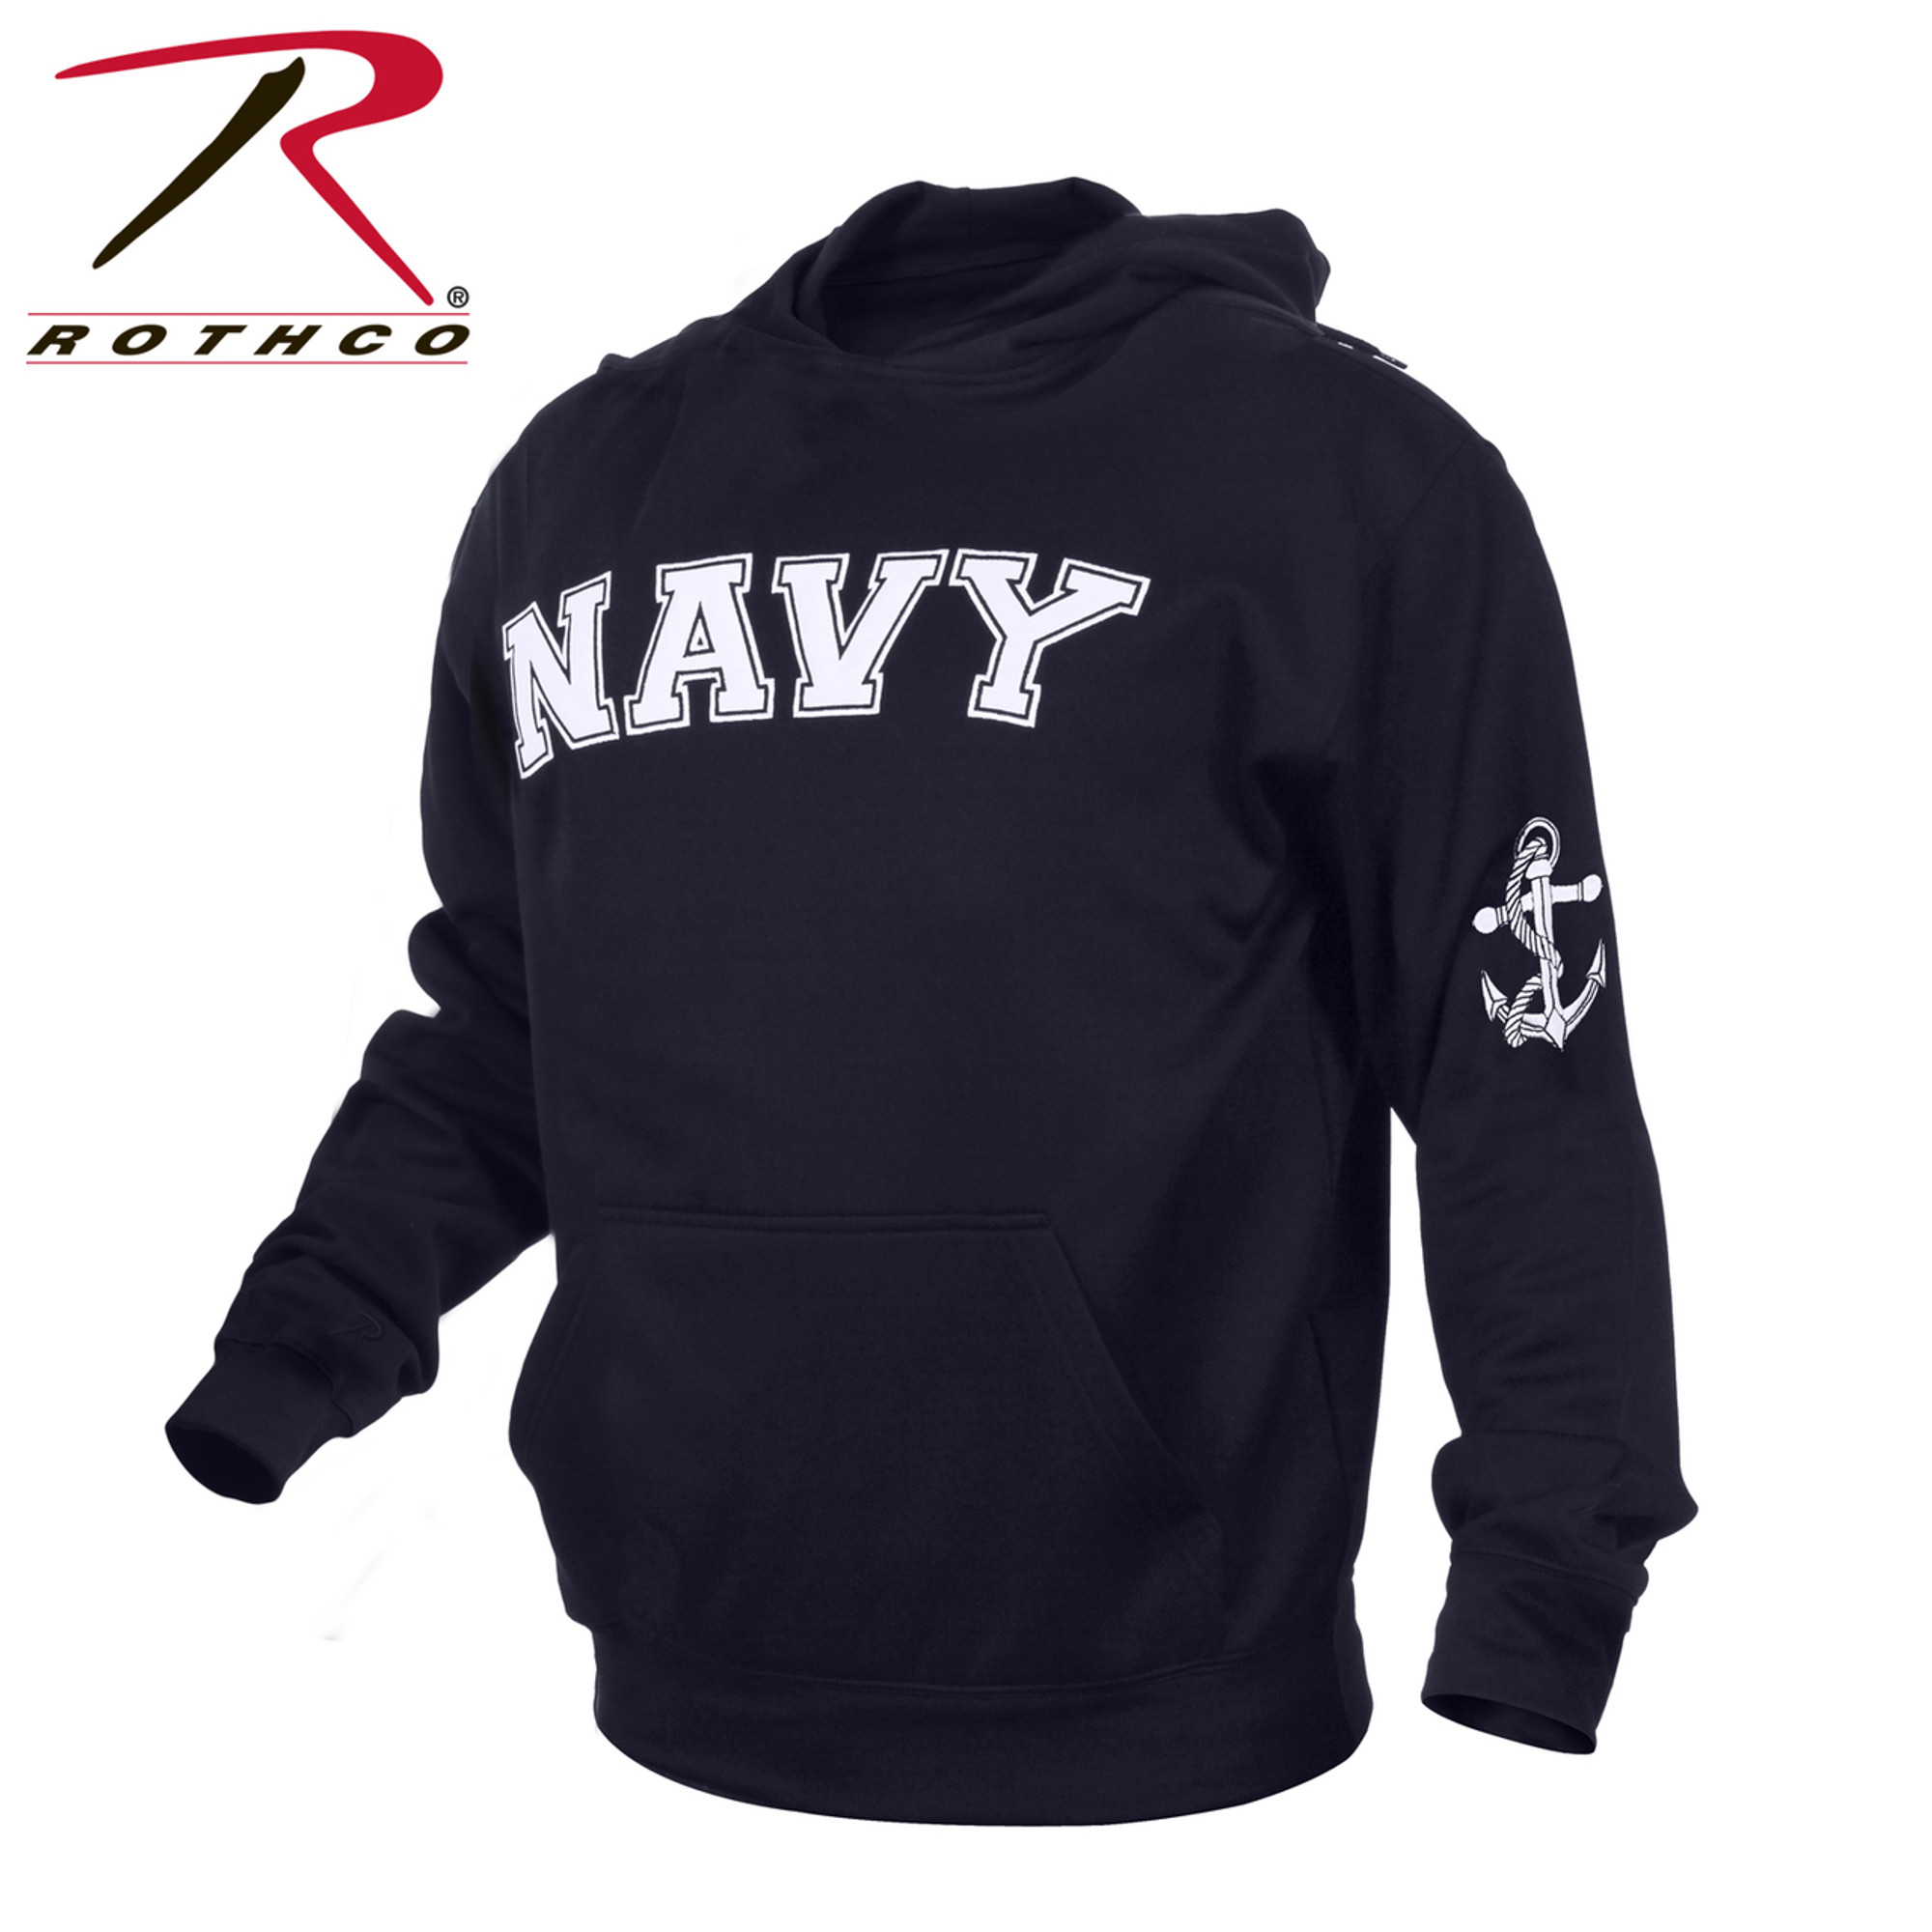 Rothco Military Embroidered Pullover Hoodie - Navy